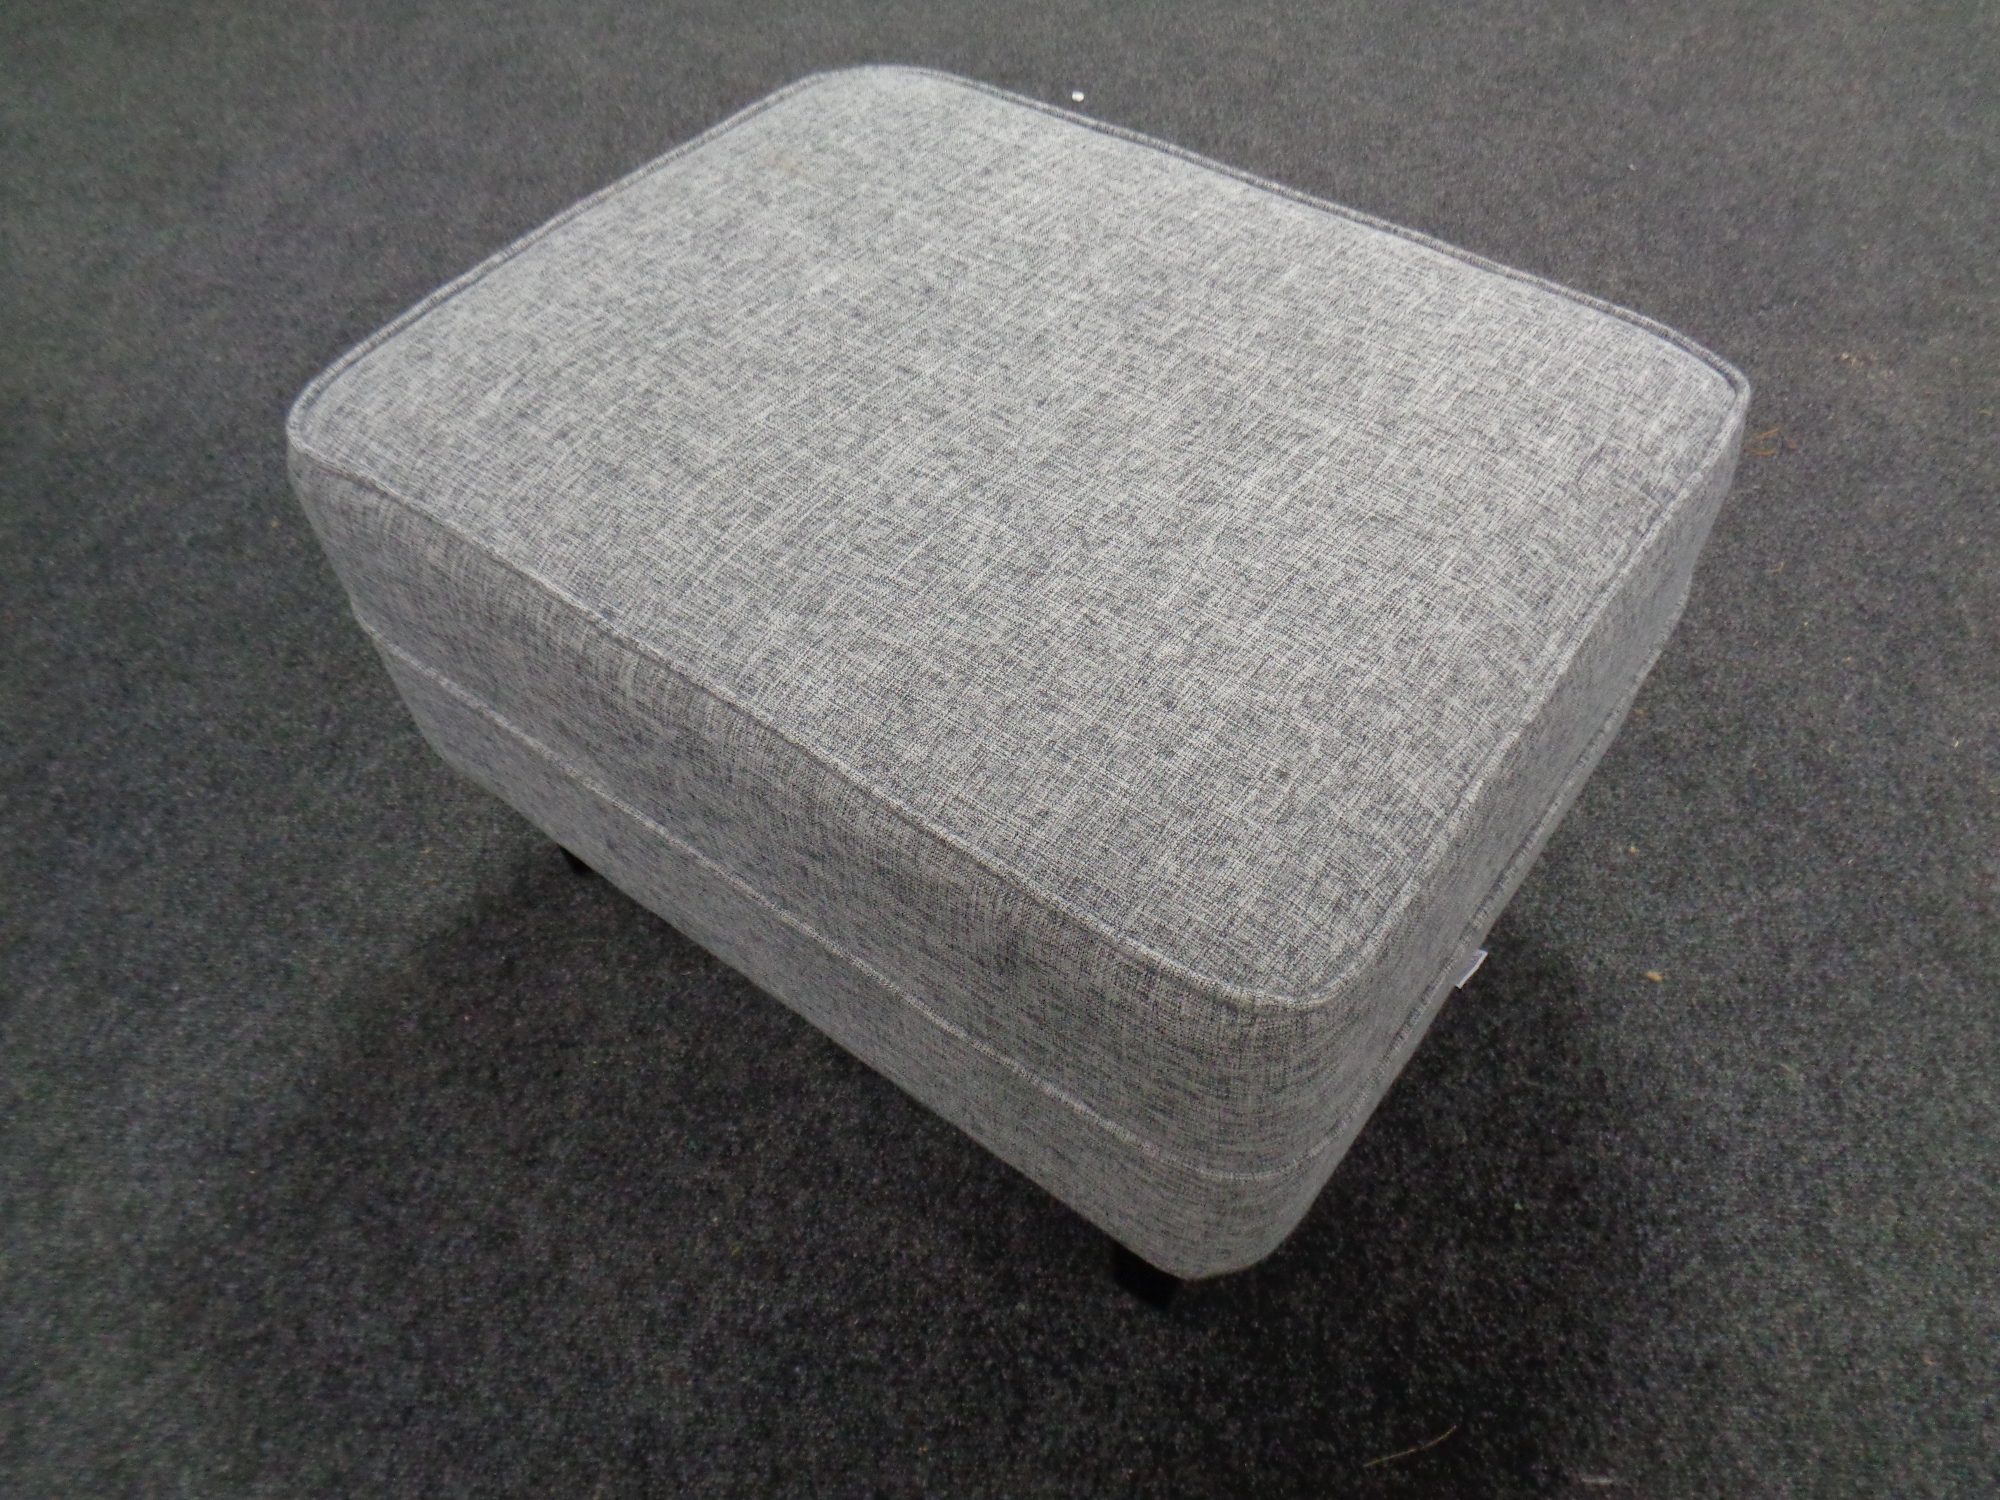 A contemporary Lifelook footstool upholstered in a grey fabric